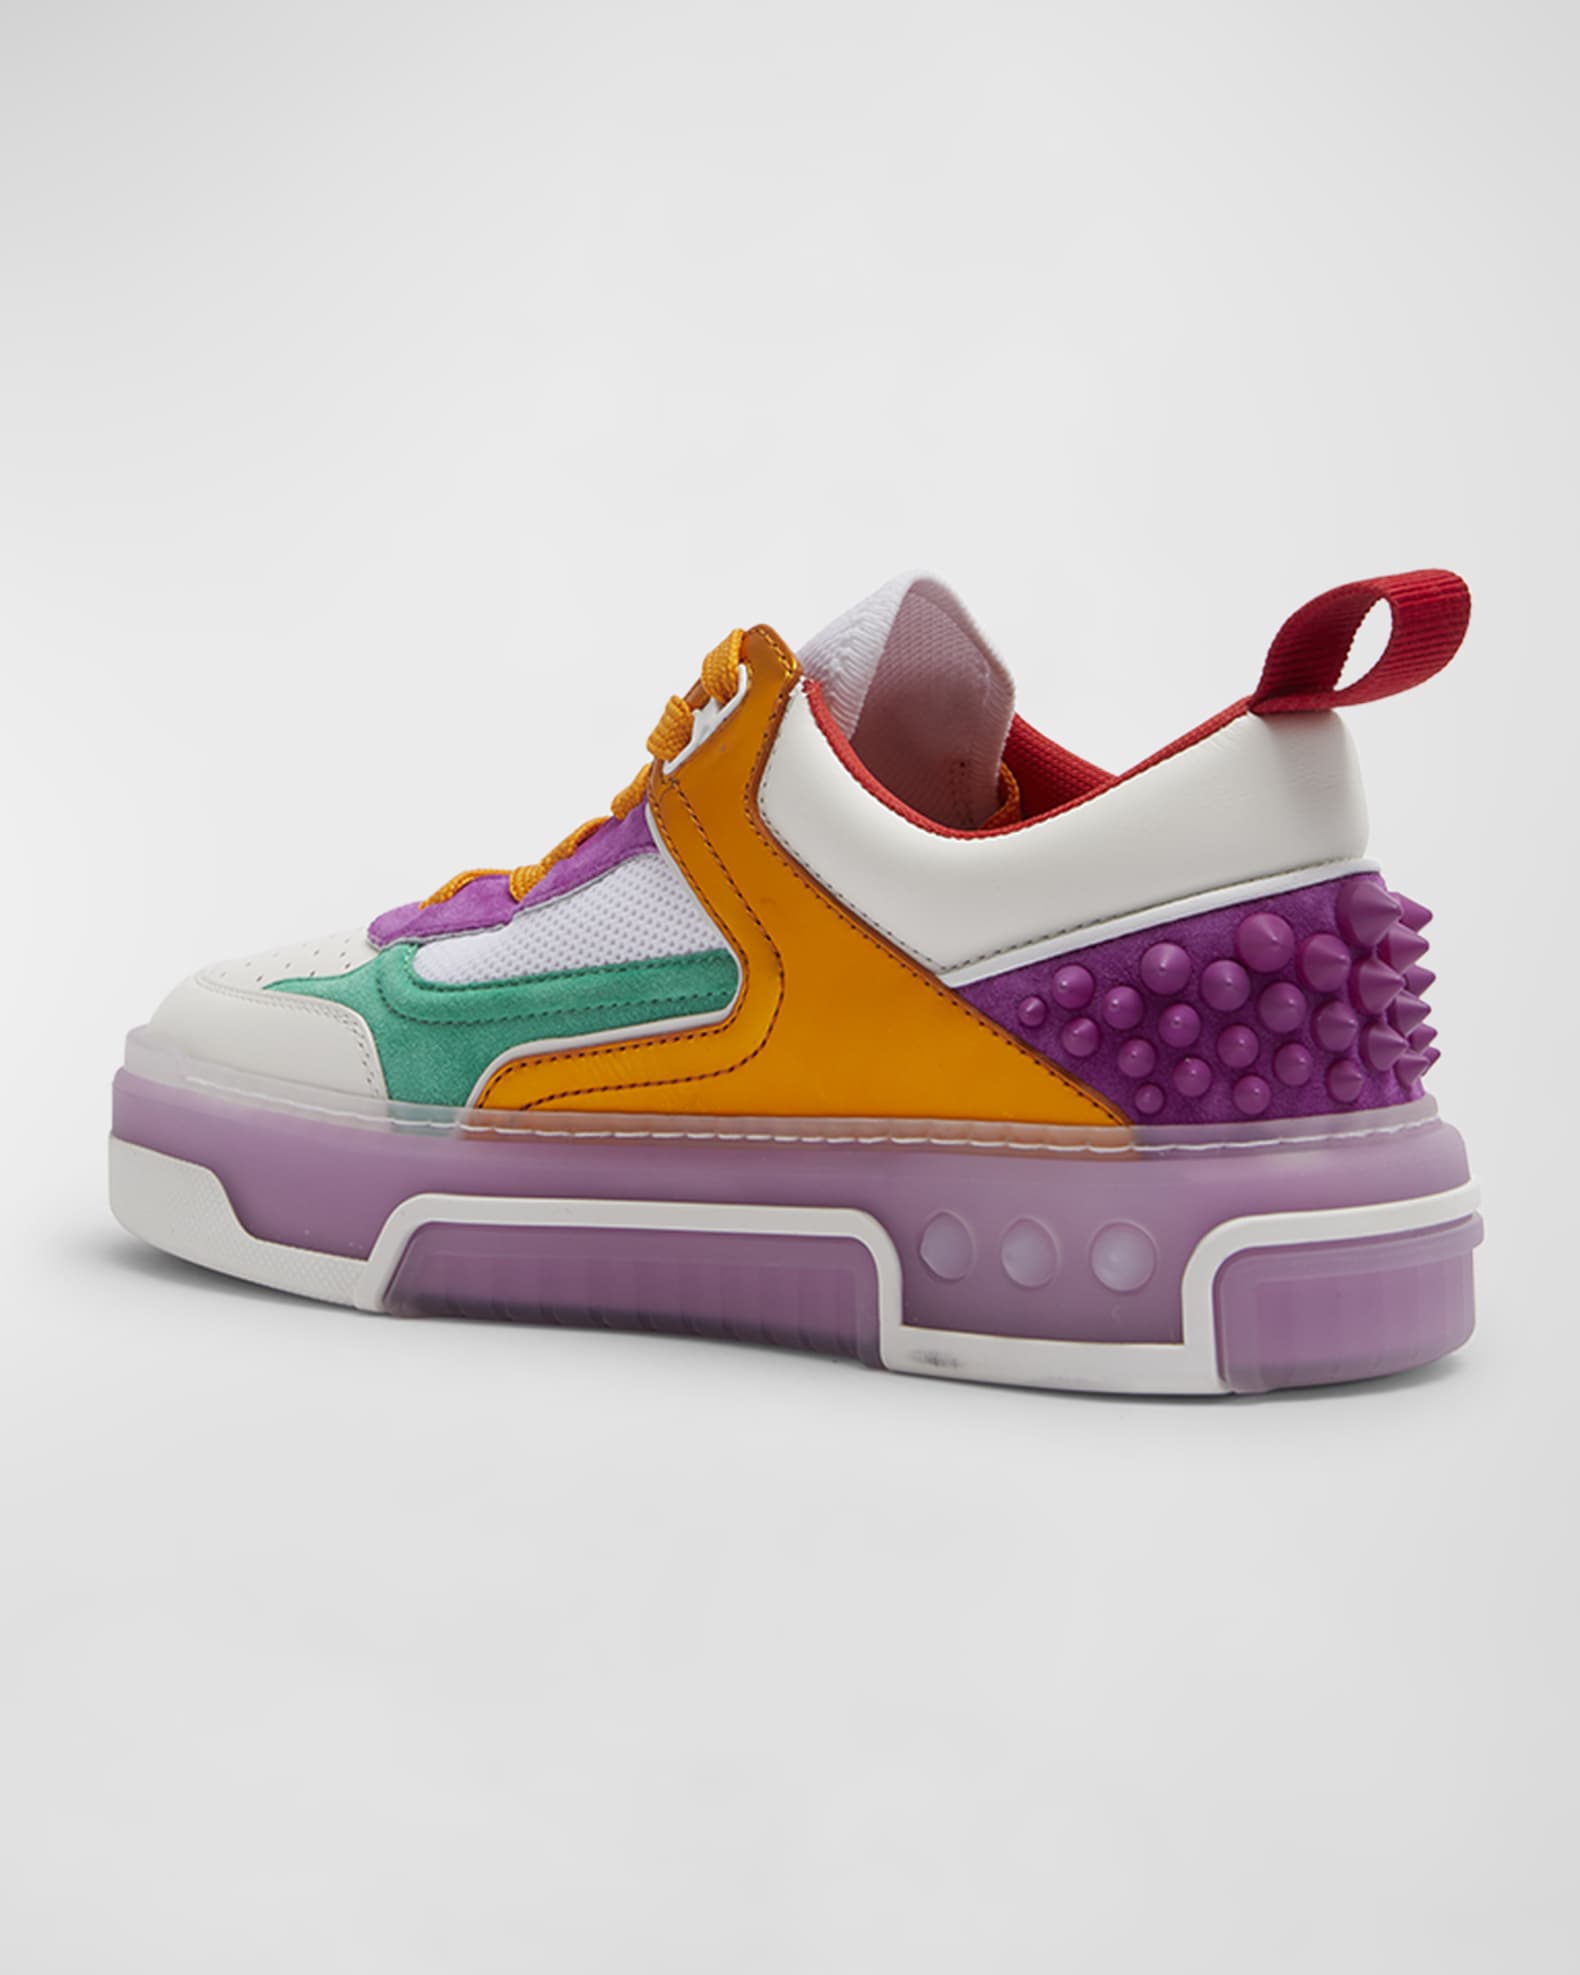 Christian Louboutin Astroloubi Donna Multicolor Spike Low-Top Sneakers